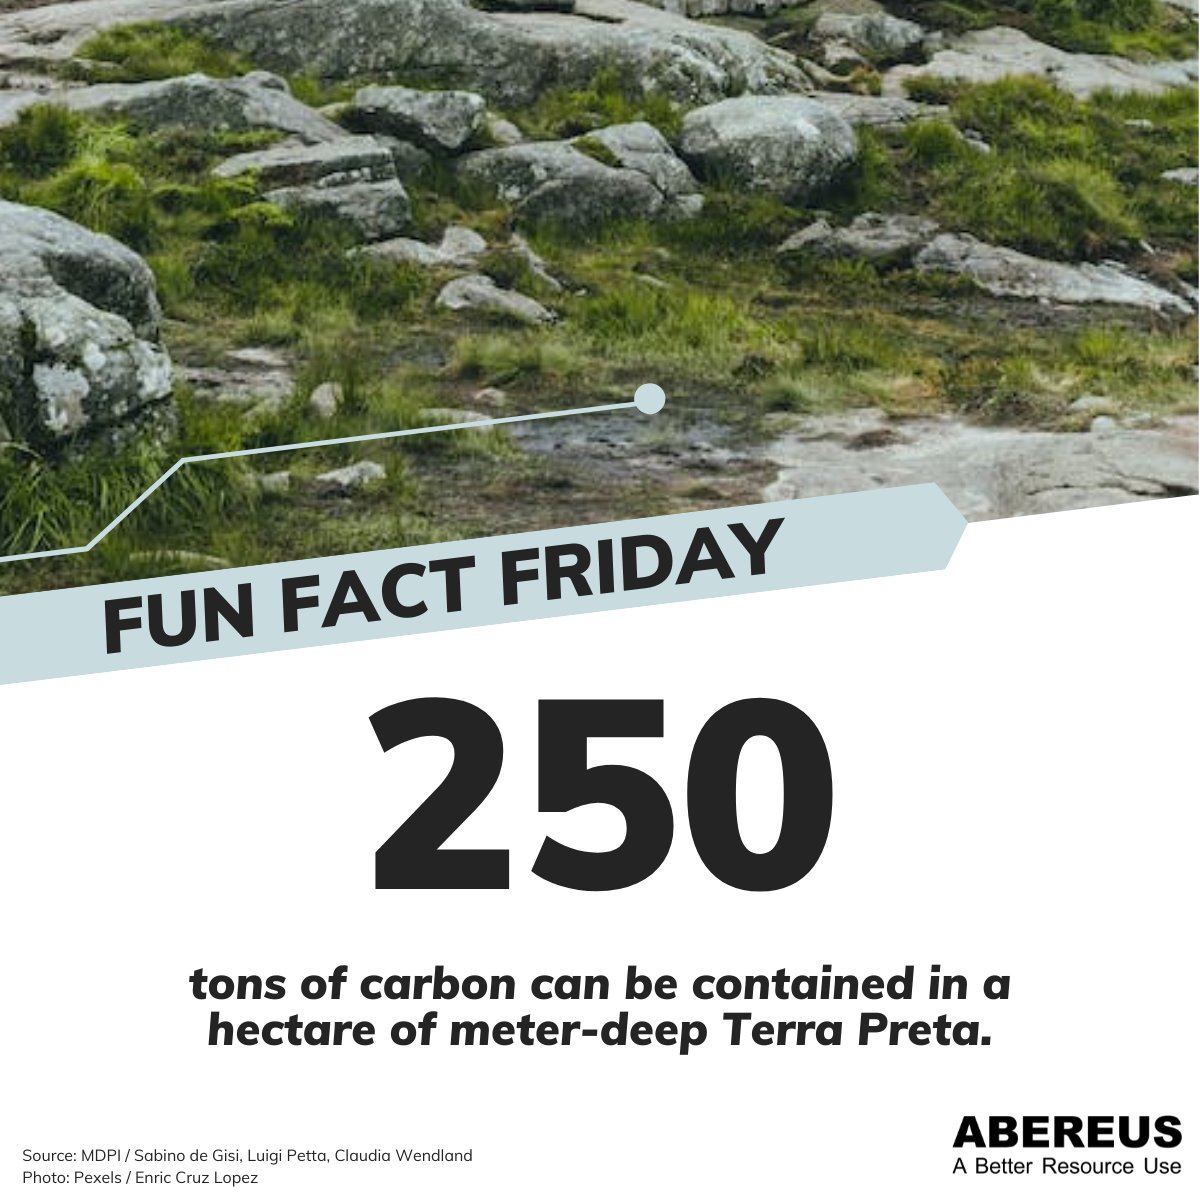 250 tons of #carbon can be contained in a hectare of meter-deep Terra Preta.

By the way, unimproved #soil generally only holds up to 100 tons of carbon. Next week we'll talk about steps to produce #terraPreta from what we consider #human waste.

#FFF #FunFactFriday #FunFact